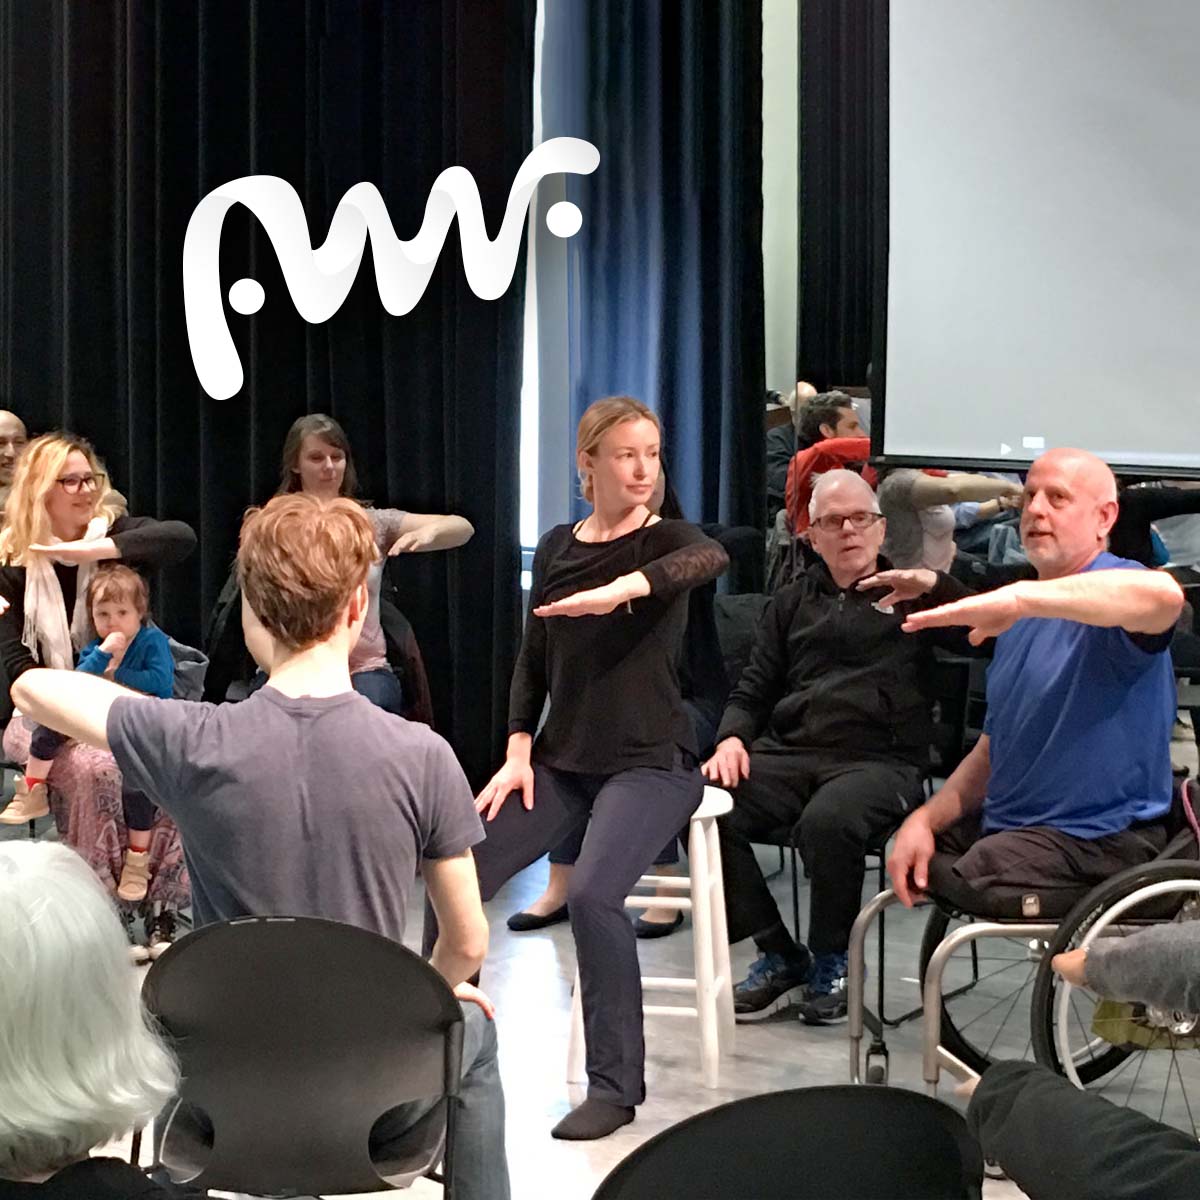 A group of people taking movement instructions with a dancer in a wheelchair